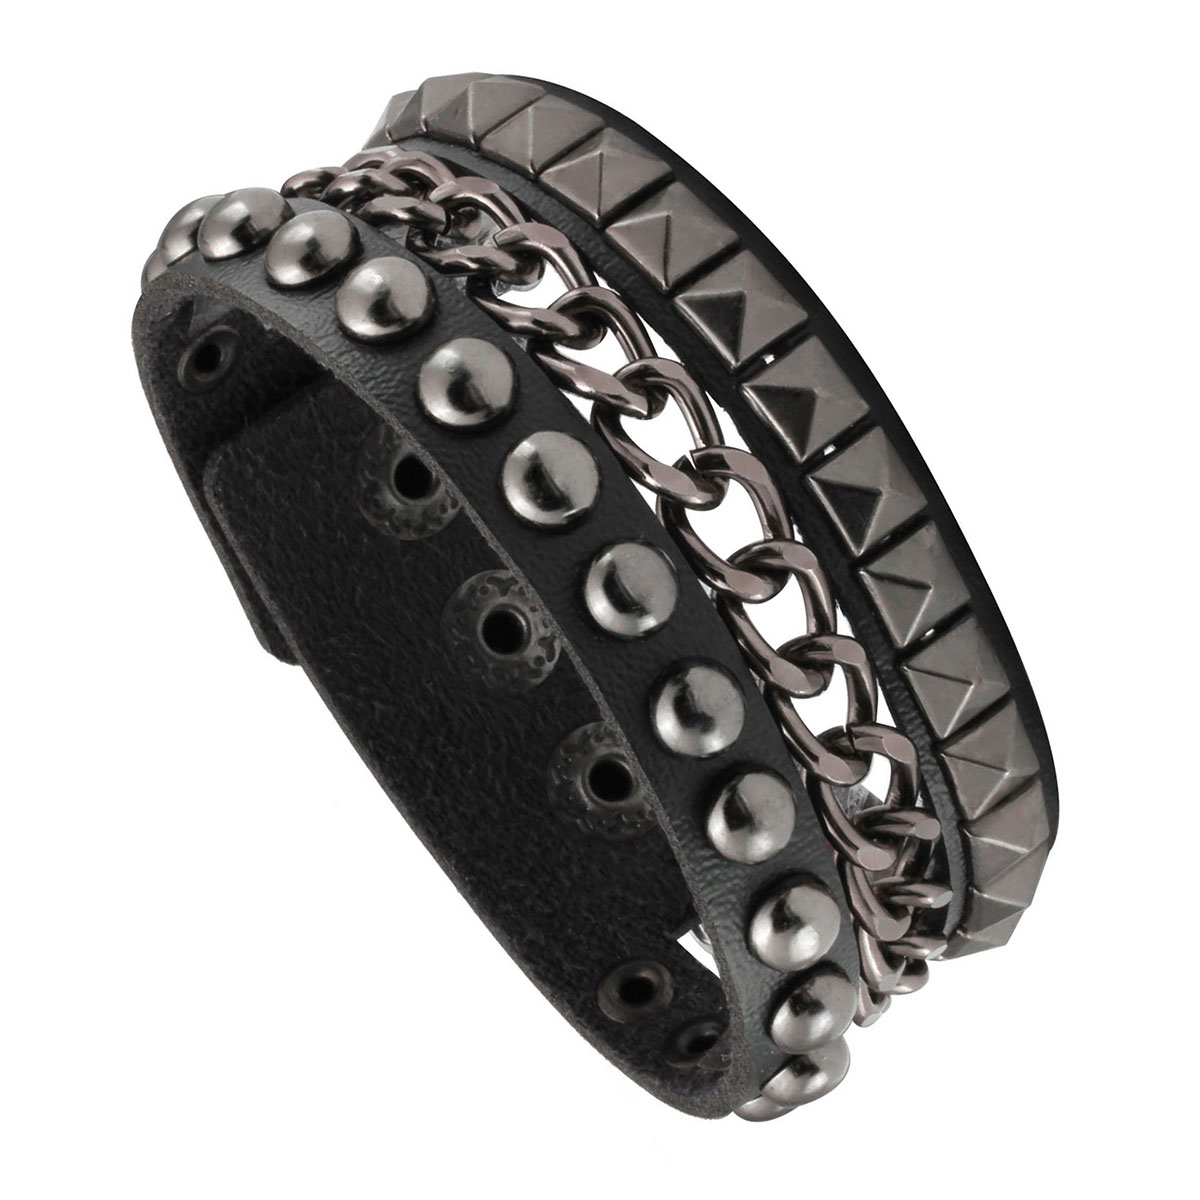 Punk alloy bracelet faux leather rivets studded multi layers cuffs buckle wristband 